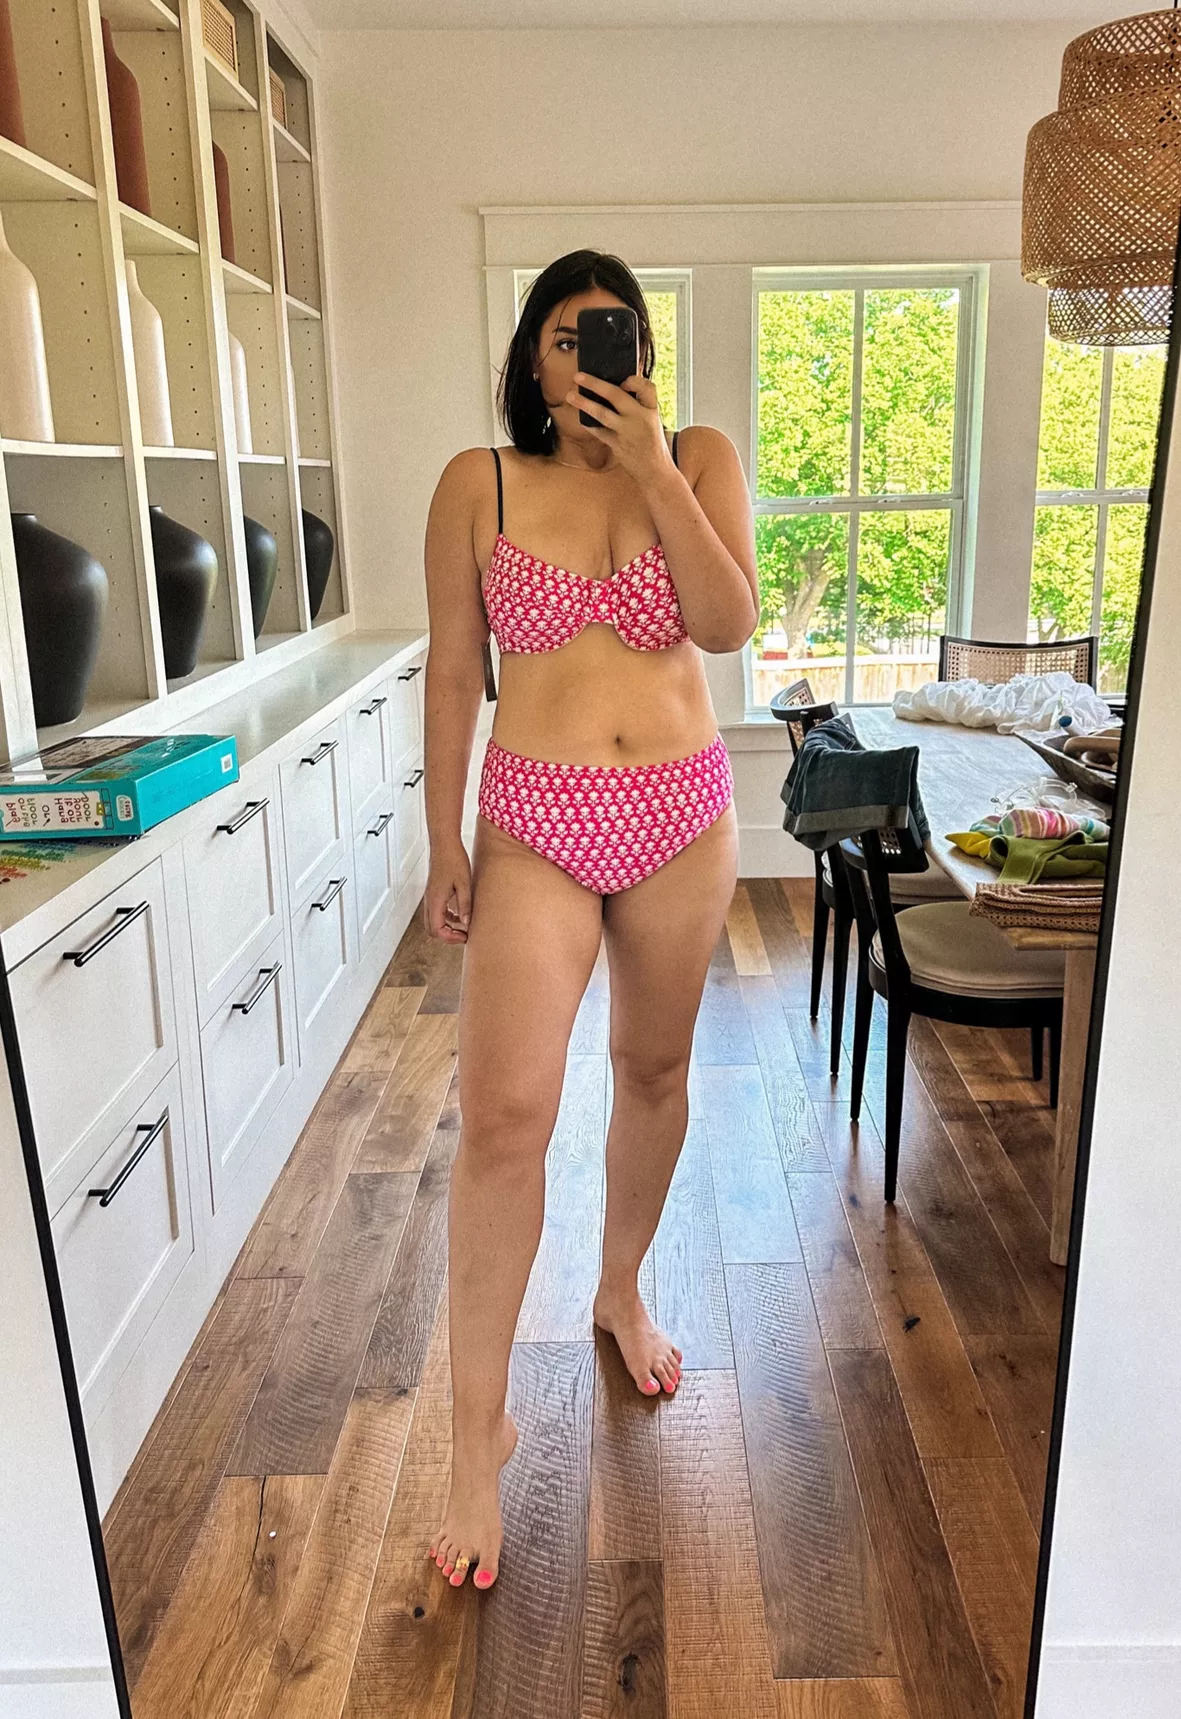 Dallas designer launches uplifting swimwear for women with itty bitty fit  issue - CultureMap Dallas